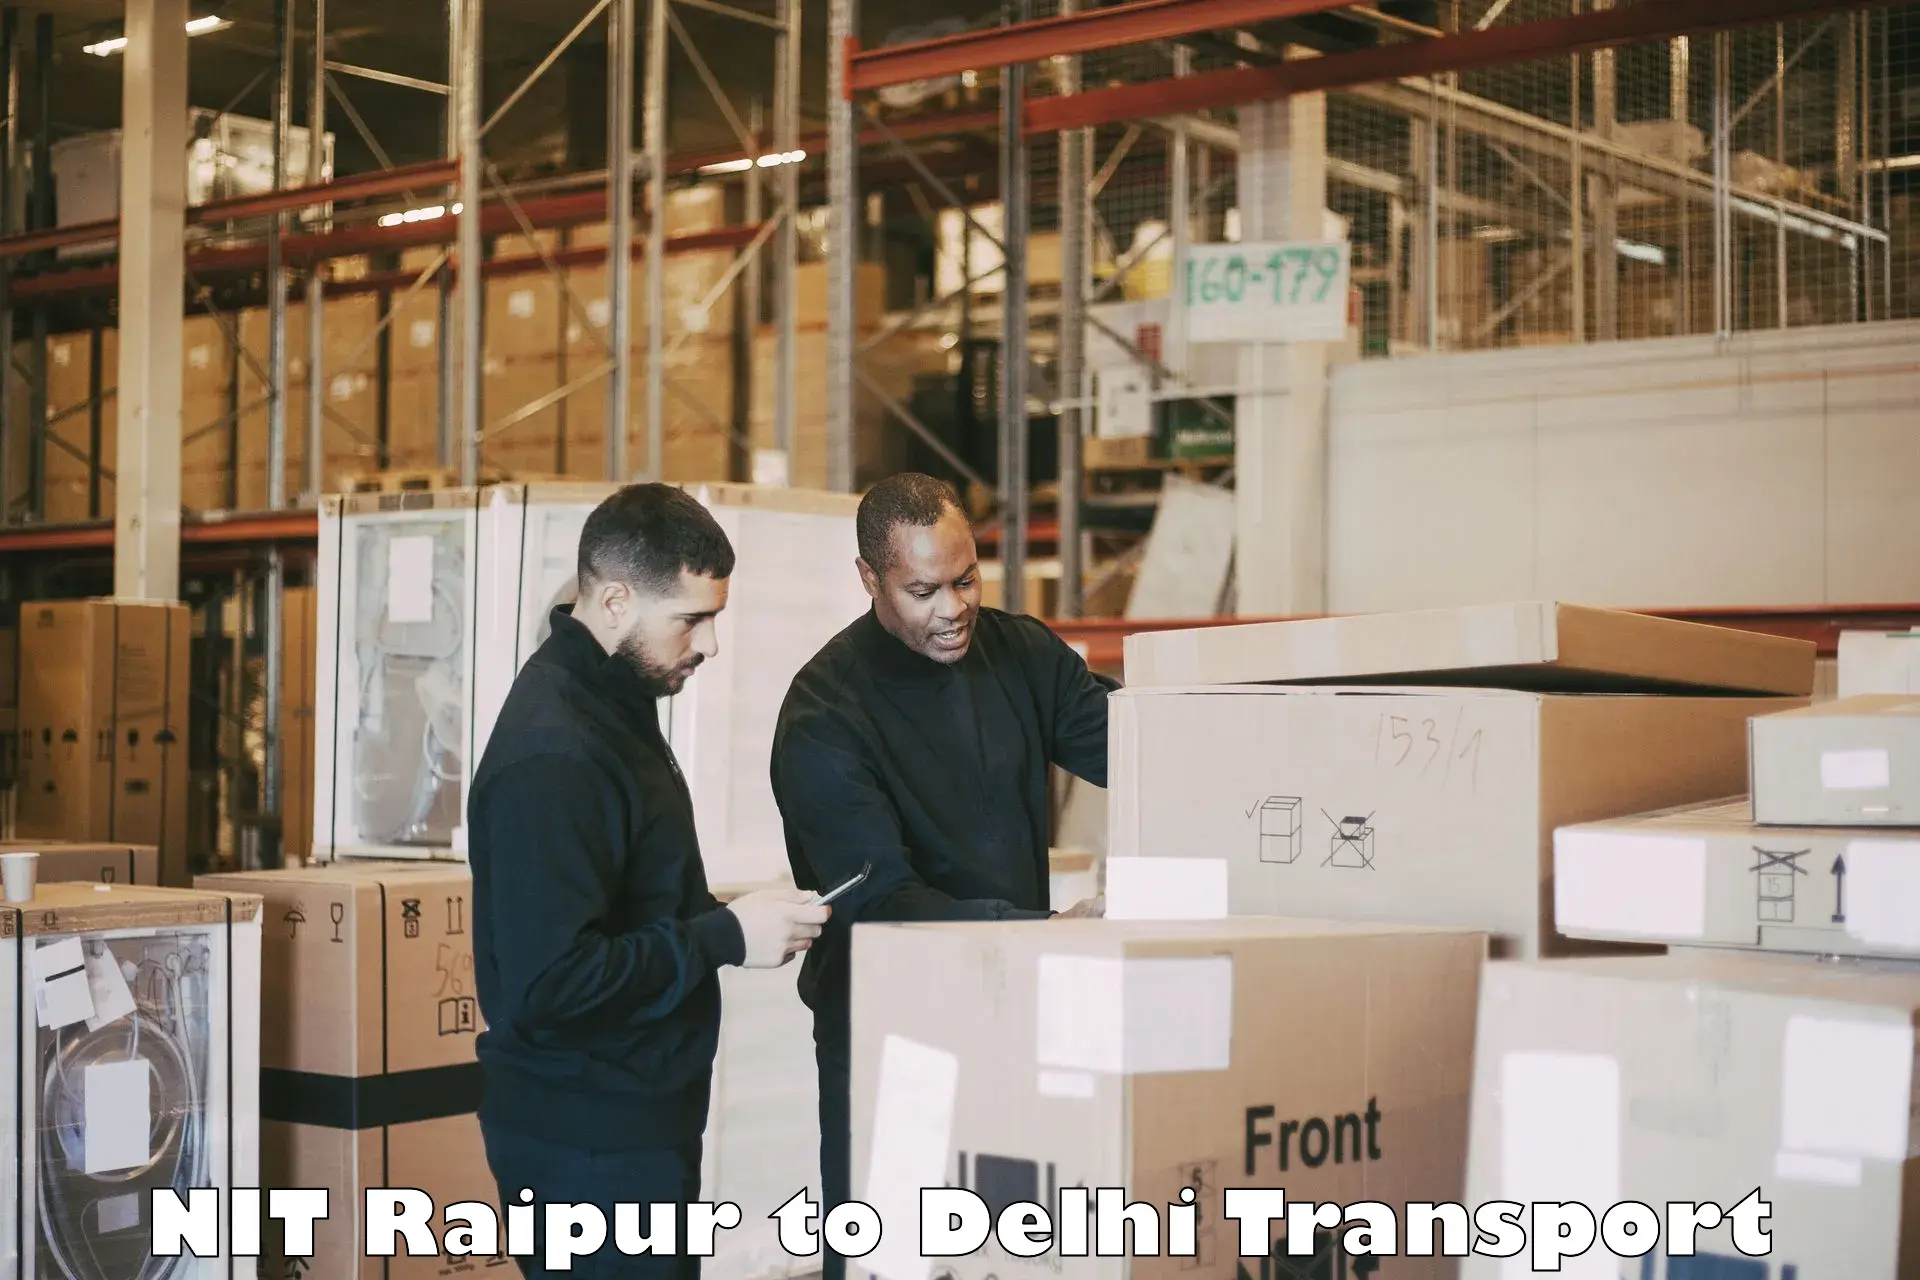 Transport shared services in NIT Raipur to East Delhi